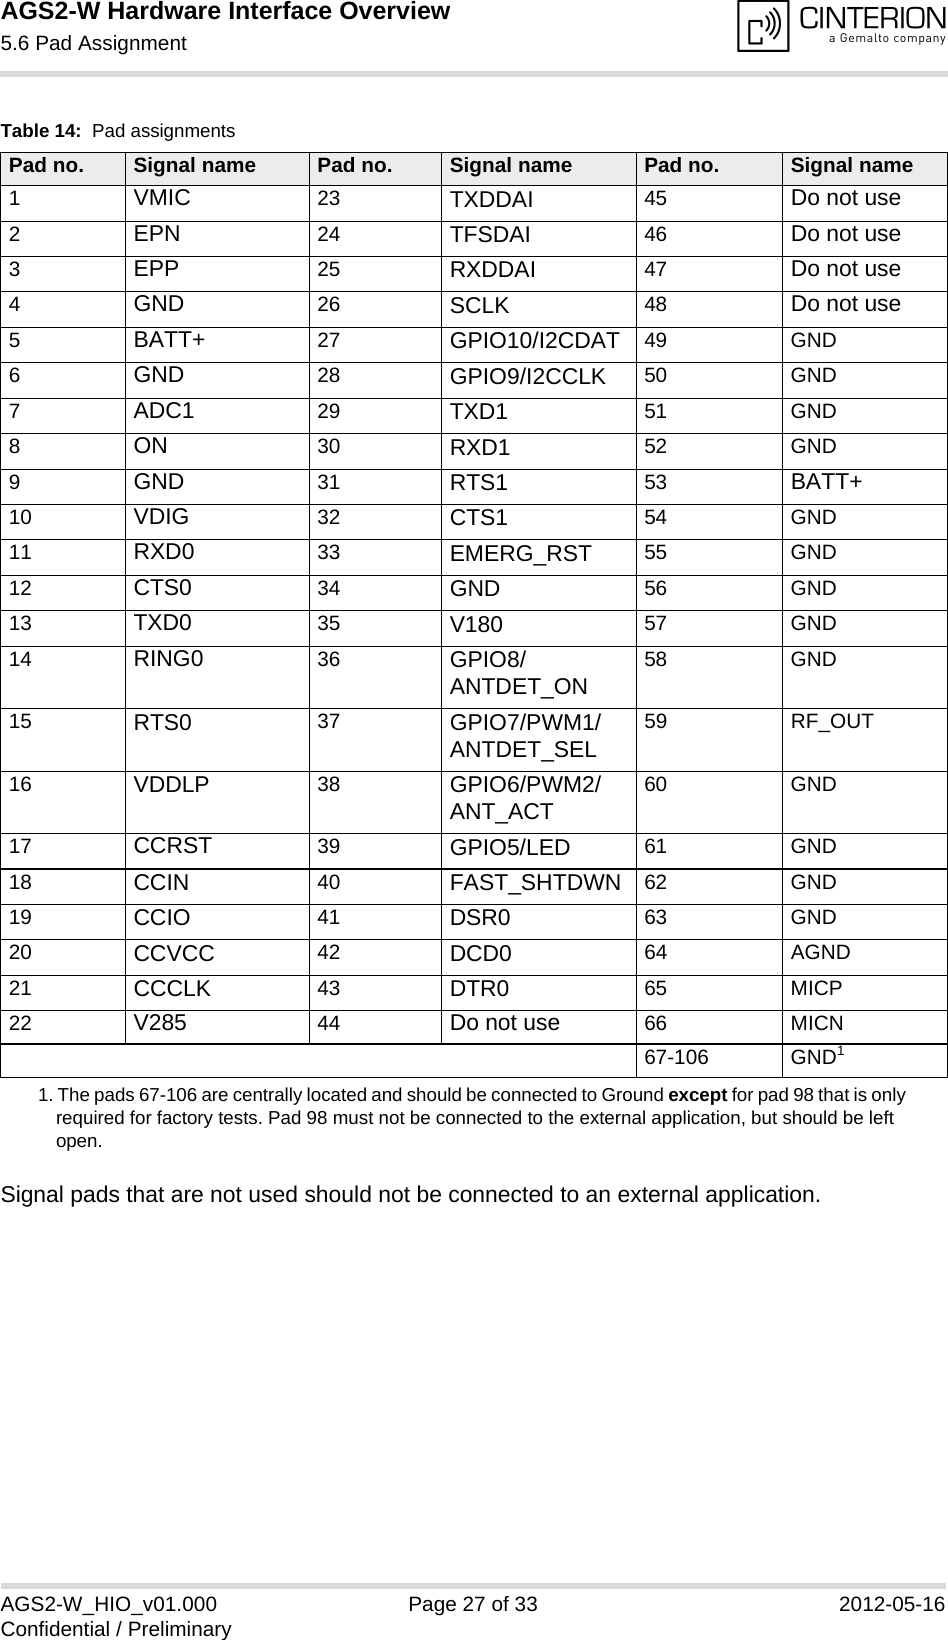 AGS2-W Hardware Interface Overview5.6 Pad Assignment28AGS2-W_HIO_v01.000 Page 27 of 33 2012-05-16Confidential / PreliminarySignal pads that are not used should not be connected to an external application.Table 14:  Pad assignments Pad no. Signal name Pad no. Signal name Pad no. Signal name1VMIC 23 TXDDAI 45 Do not use2EPN 24 TFSDAI 46 Do not use3EPP 25 RXDDAI 47 Do not use4GND 26 SCLK 48 Do not use5BATT+ 27 GPIO10/I2CDAT 49 GND6GND 28 GPIO9/I2CCLK 50 GND7ADC1 29 TXD1 51 GND8ON 30 RXD1 52 GND9GND 31 RTS1 53 BATT+10 VDIG 32 CTS1 54 GND11 RXD0 33 EMERG_RST 55 GND12 CTS0 34 GND 56 GND13 TXD0 35 V180 57 GND14 RING0 36 GPIO8/ANTDET_ON58 GND15 RTS0 37 GPIO7/PWM1/ANTDET_SEL59 RF_OUT16 VDDLP 38 GPIO6/PWM2/ANT_ACT60 GND17 CCRST 39 GPIO5/LED 61 GND18 CCIN 40 FAST_SHTDWN 62 GND19 CCIO 41 DSR0 63 GND20 CCVCC 42 DCD0 64 AGND21 CCCLK 43 DTR0 65 MICP22 V285 44 Do not use 66 MICN67-106 GND11. The pads 67-106 are centrally located and should be connected to Ground except for pad 98 that is only required for factory tests. Pad 98 must not be connected to the external application, but should be left open.